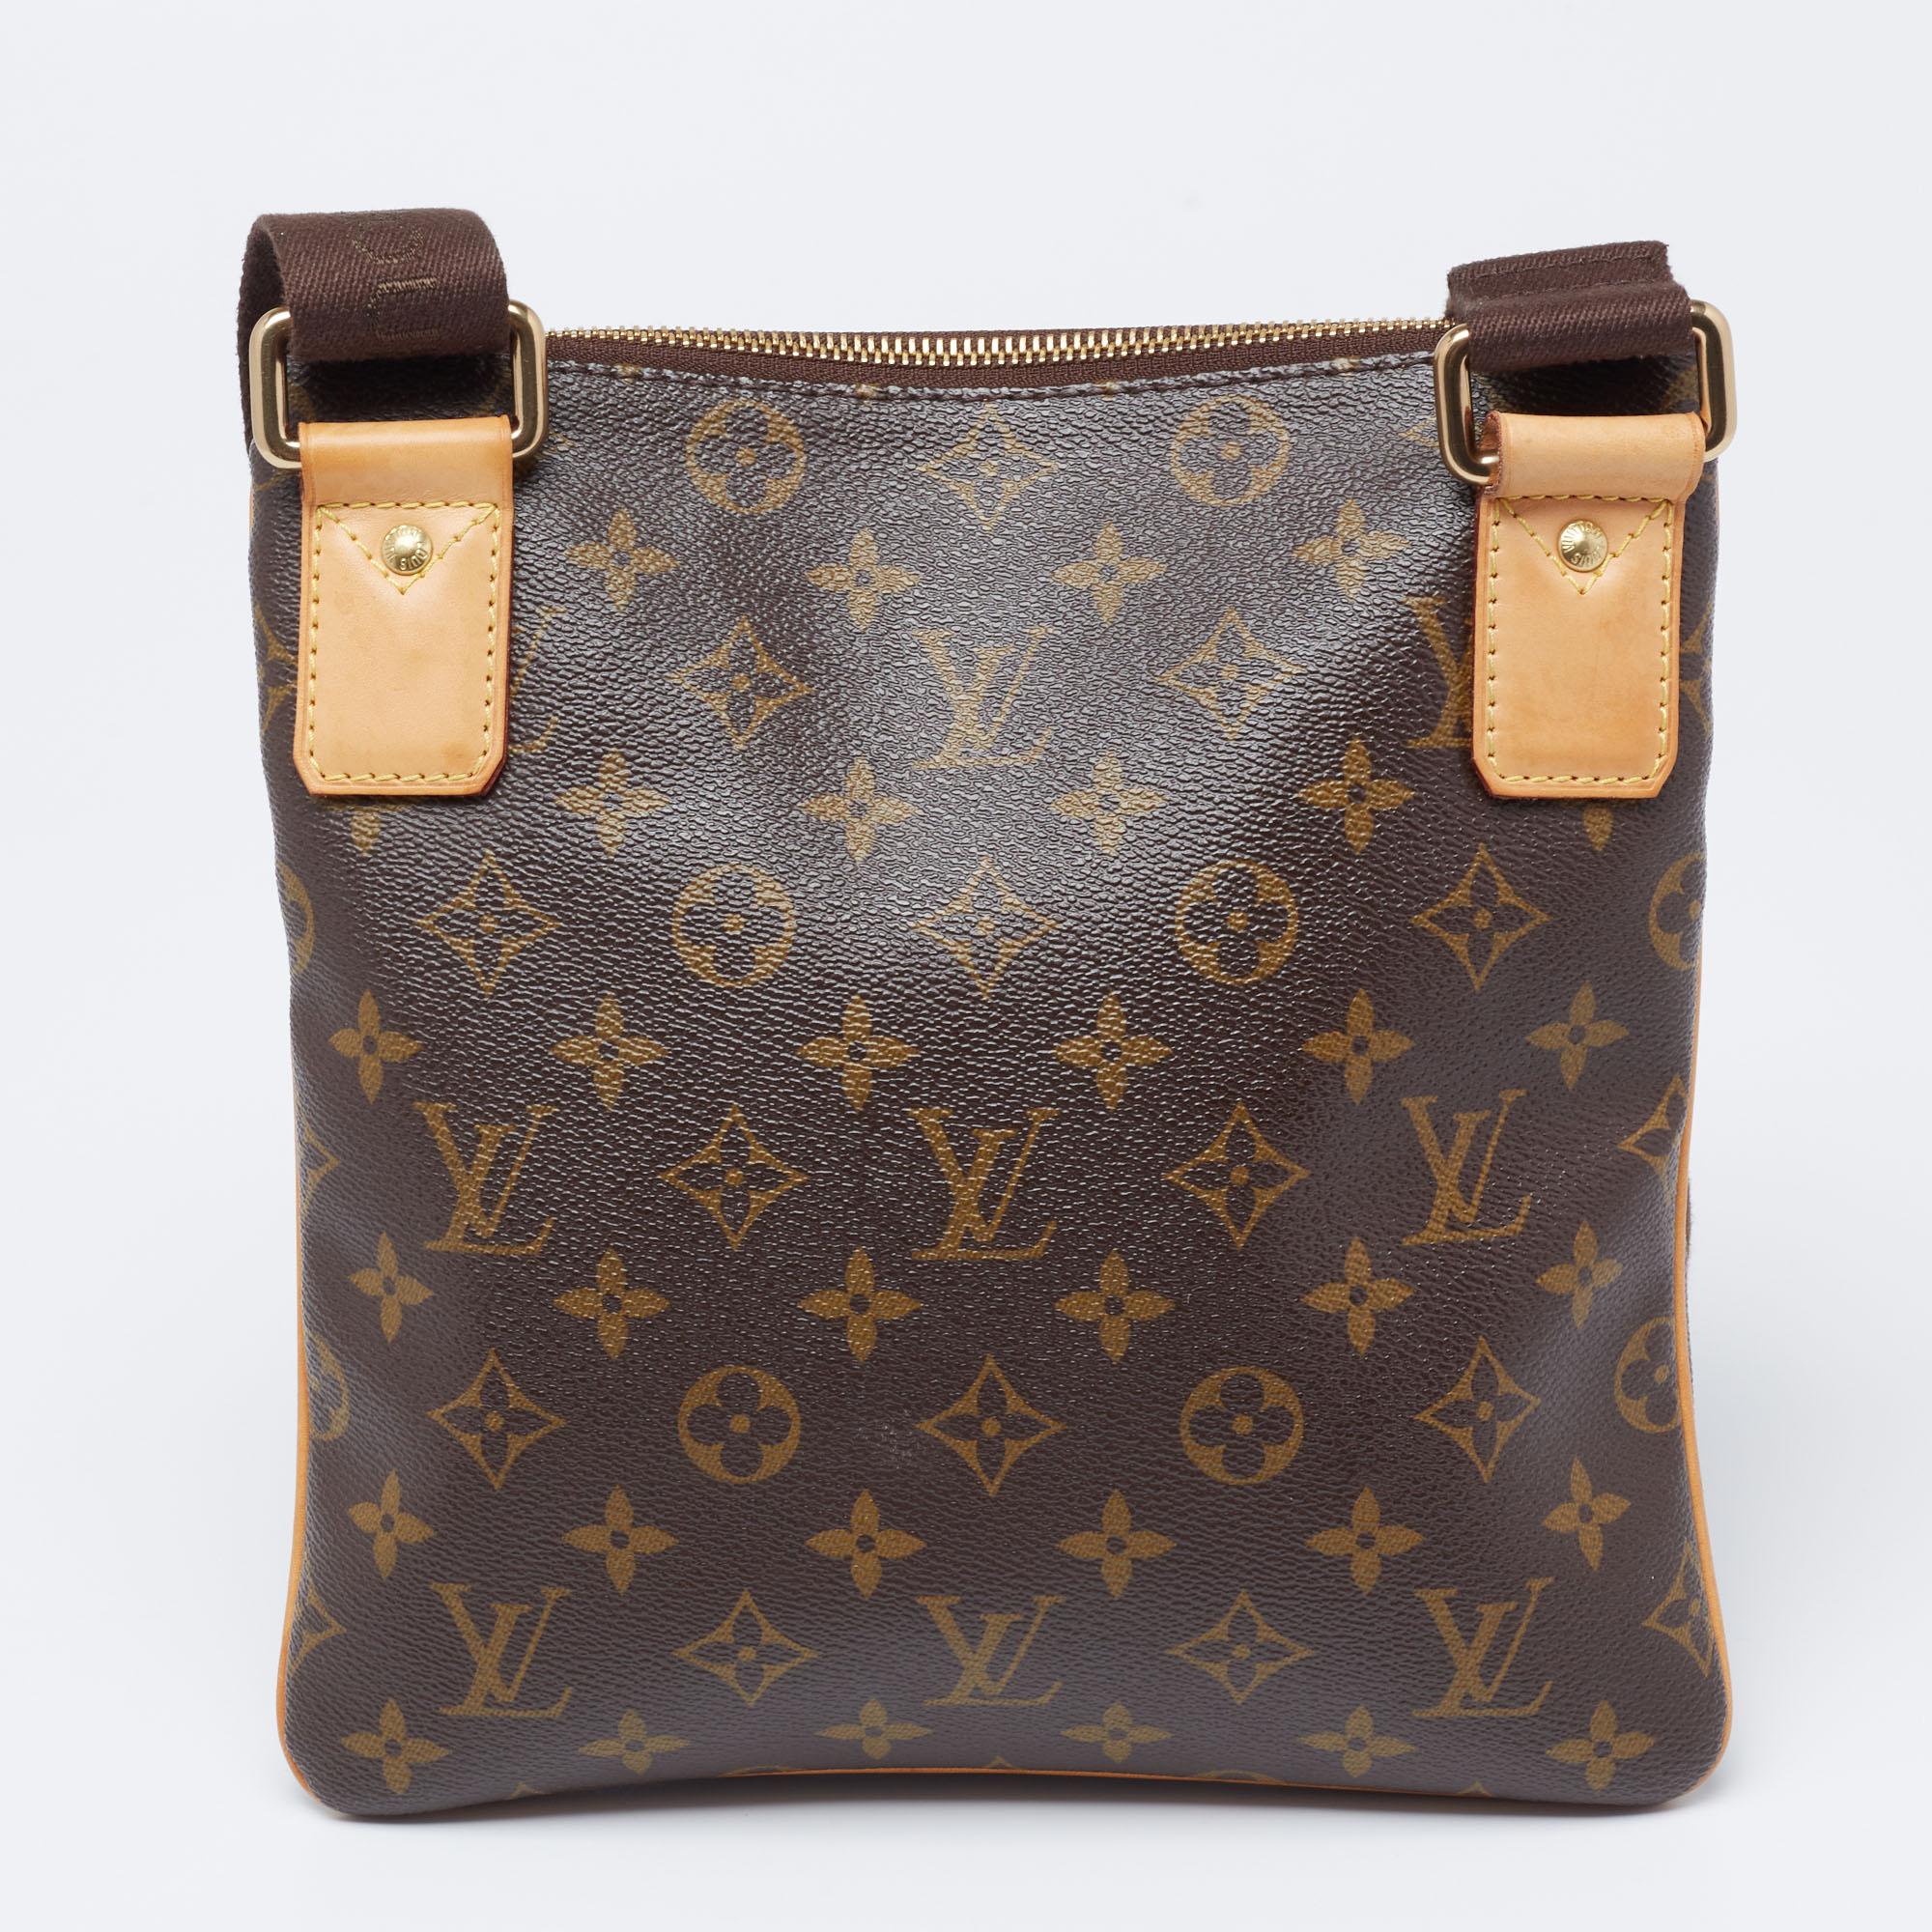 Louis Vuitton's Valmy pochette bag offers function and a signature finish. It is created using Monogram canvas and leather trims, added with gold-tone hardware, a fabric-lined interior, and a 55 cm adjustable strap. This LV accessory is a must-have!